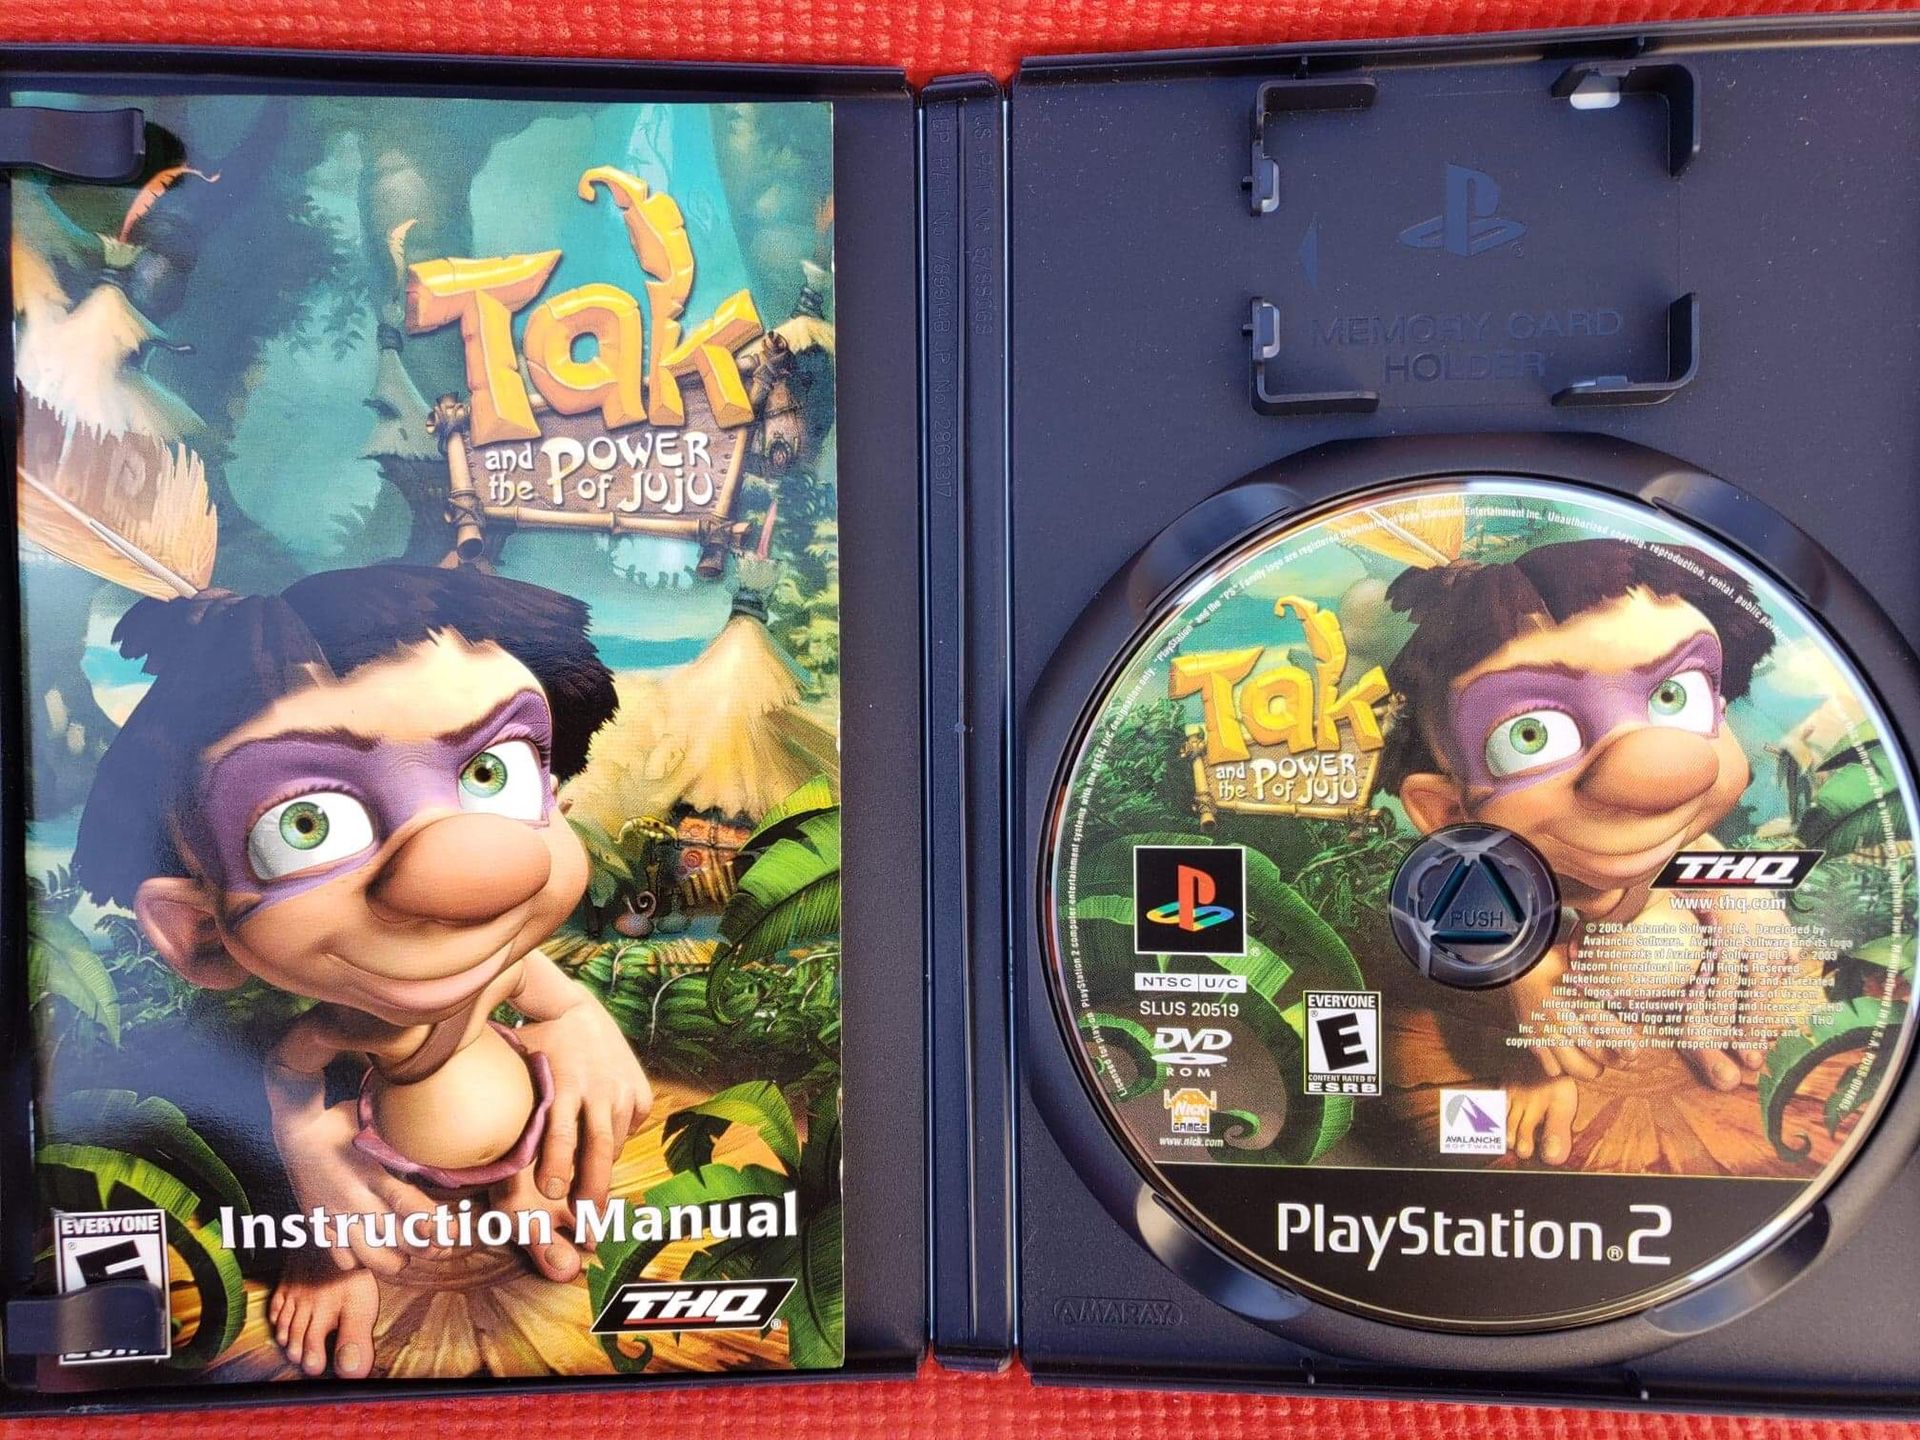 Tak an the of juju Game for Ps2 for Sale in Norwalk, CA - OfferUp